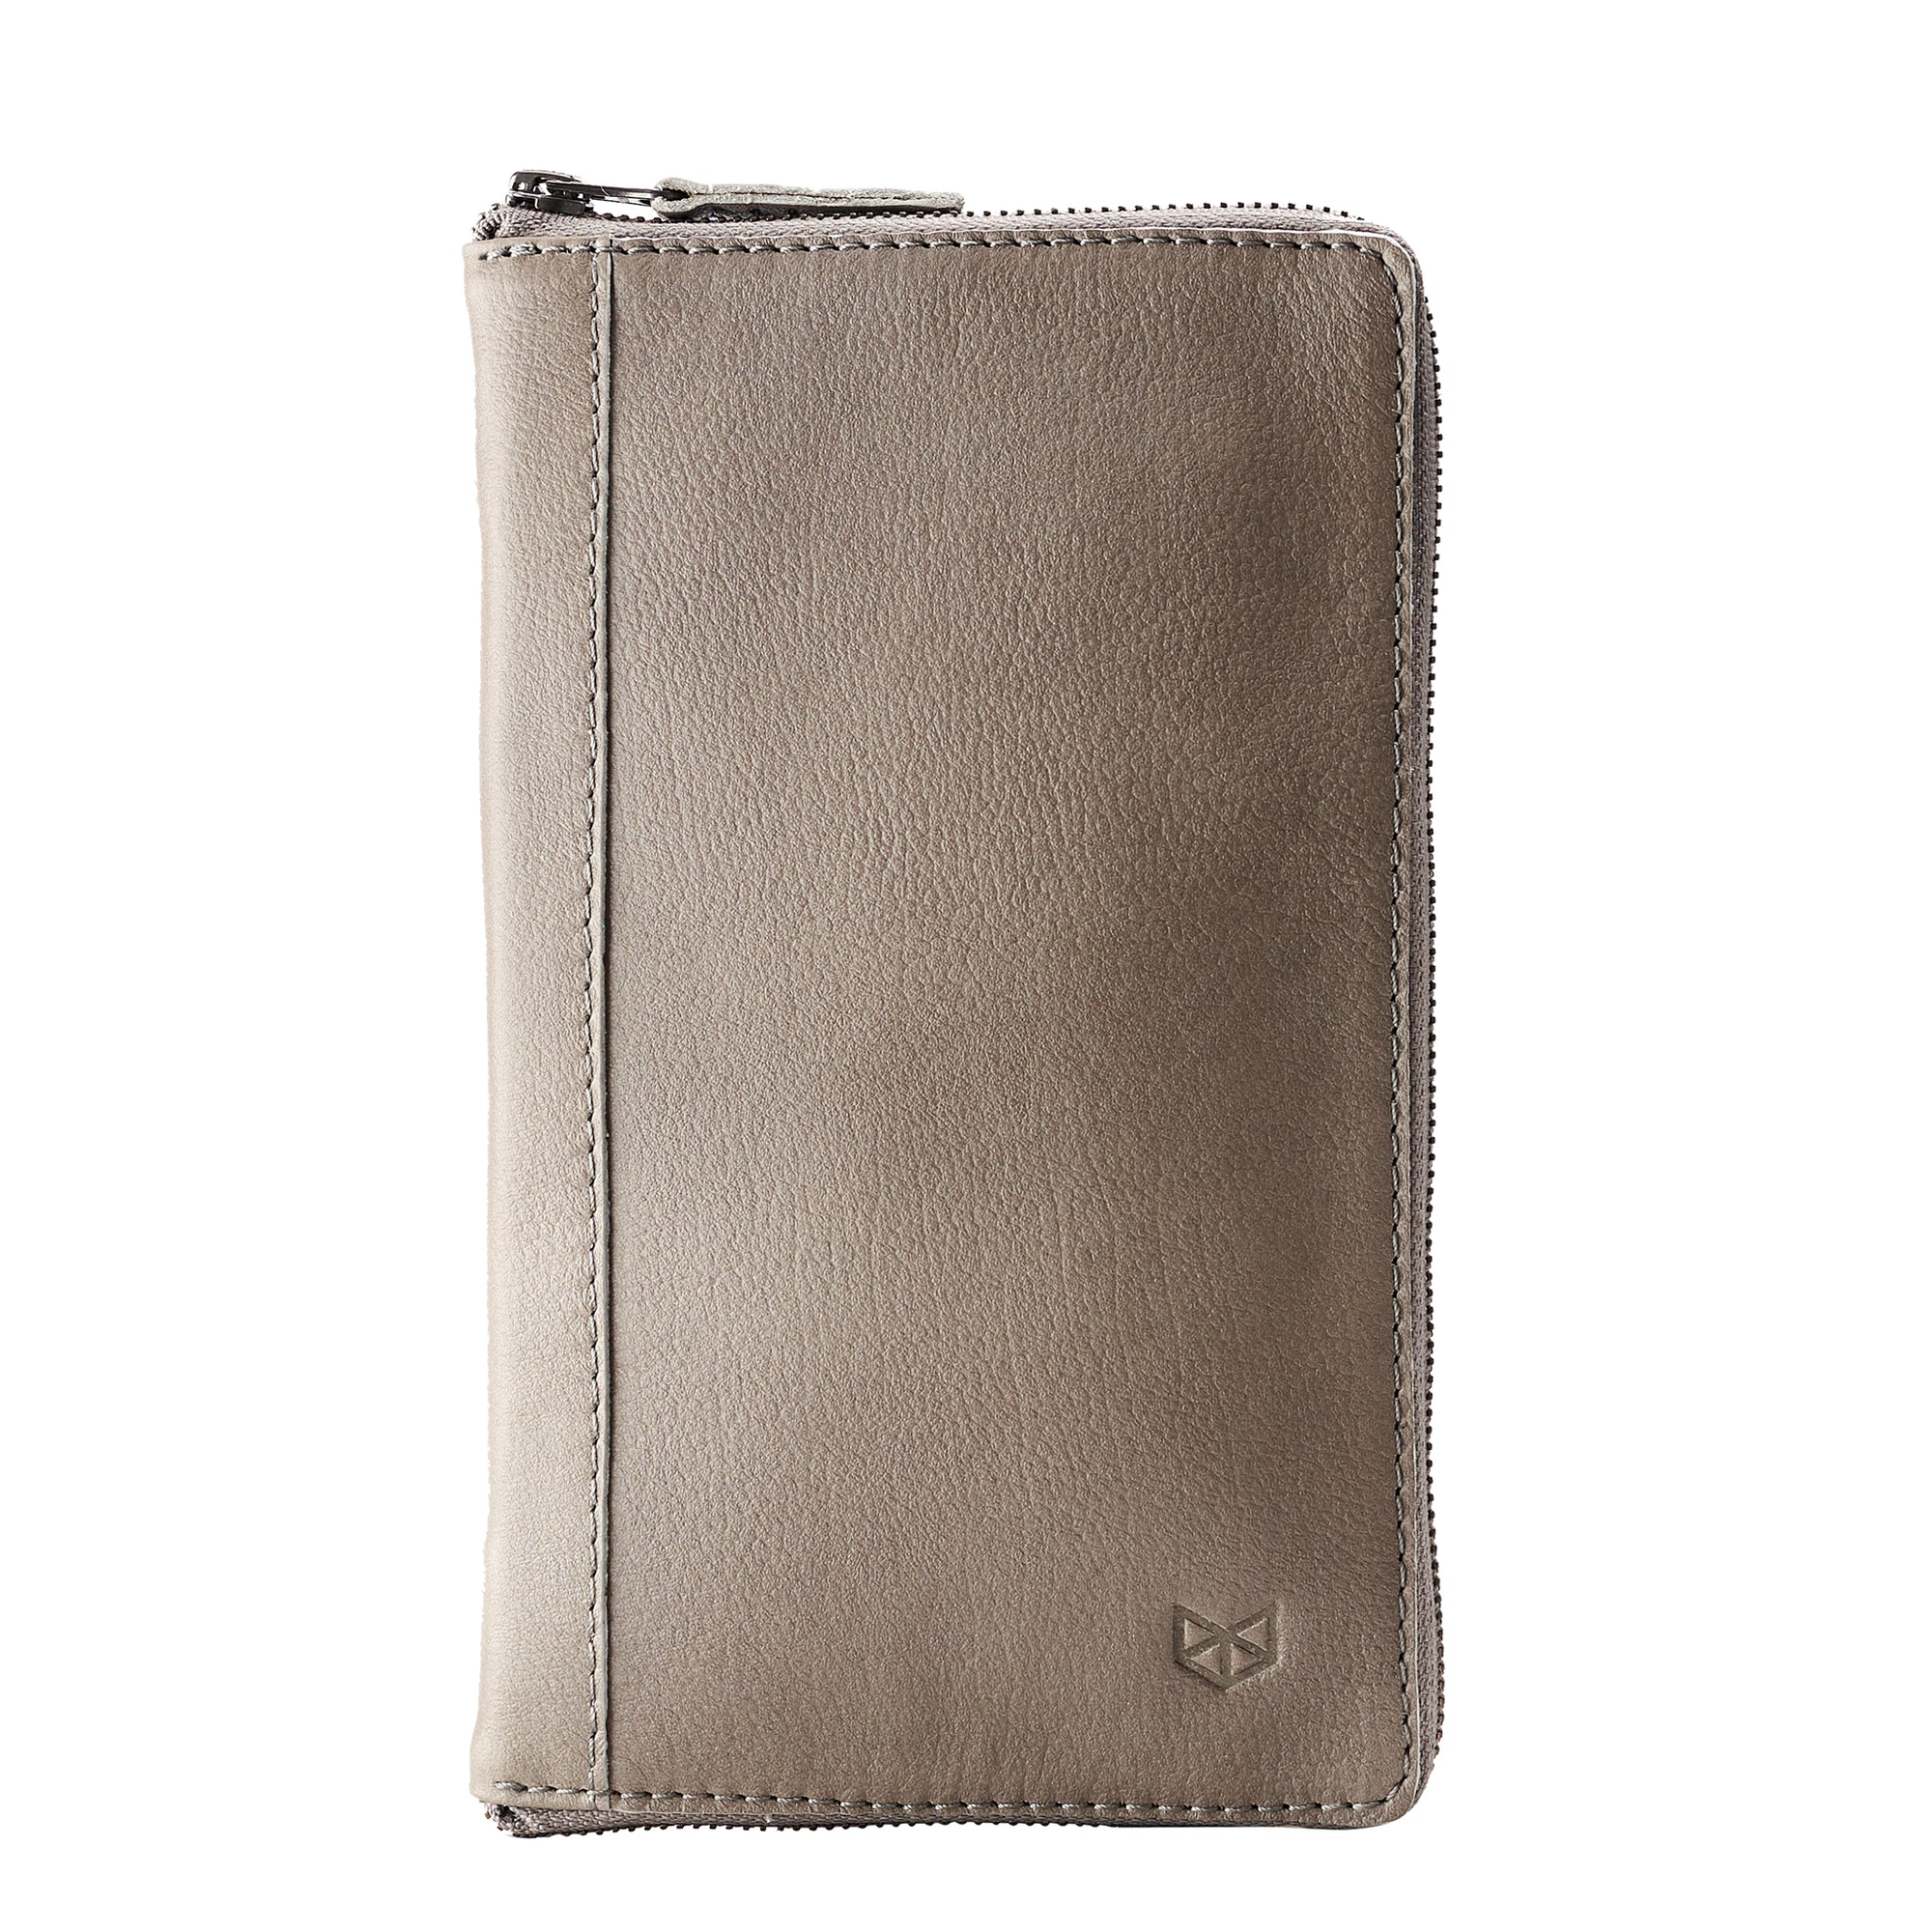 Cover. Grey Passport Holder for travelers, document organizer, travel journal by Capra Leather